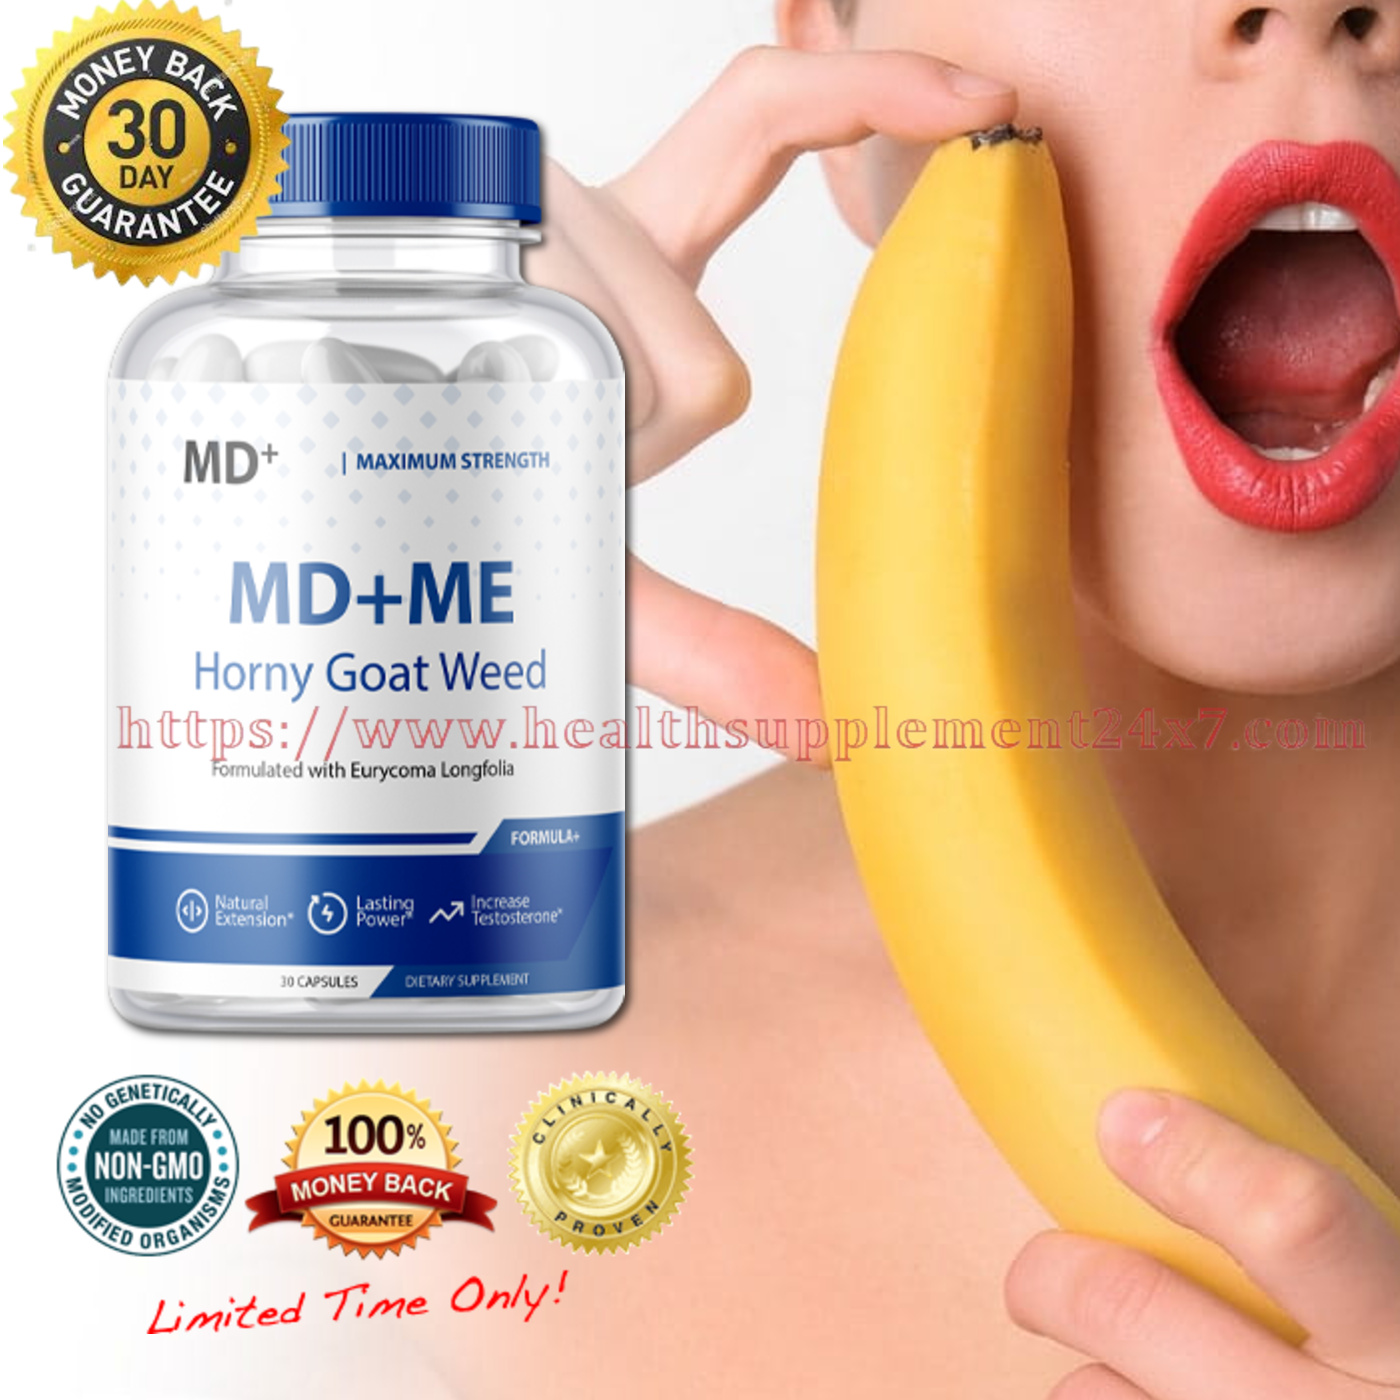 Md+me horny goat weed capsules 7